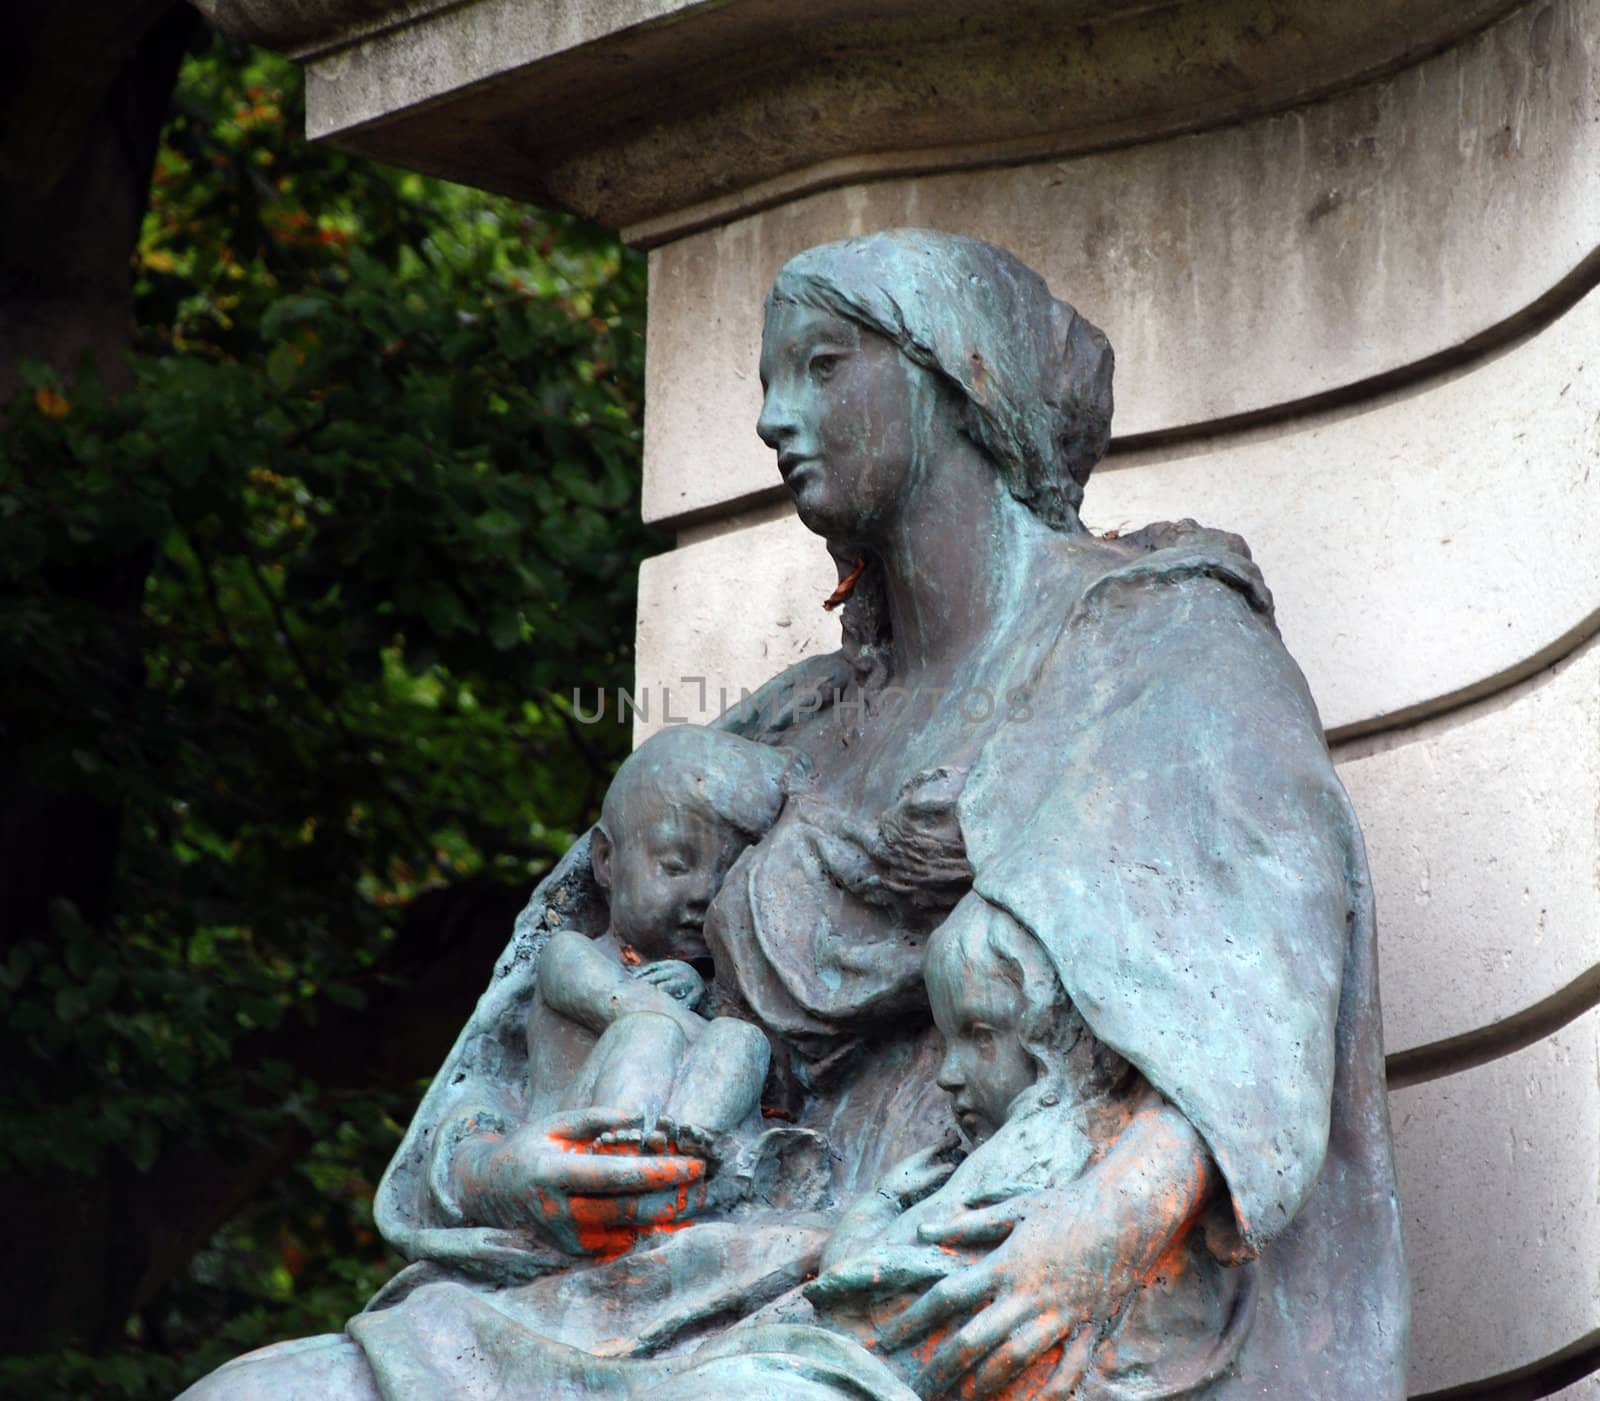 A statue of a woman holding two children which has turned blue green over time due to the nature of the metal